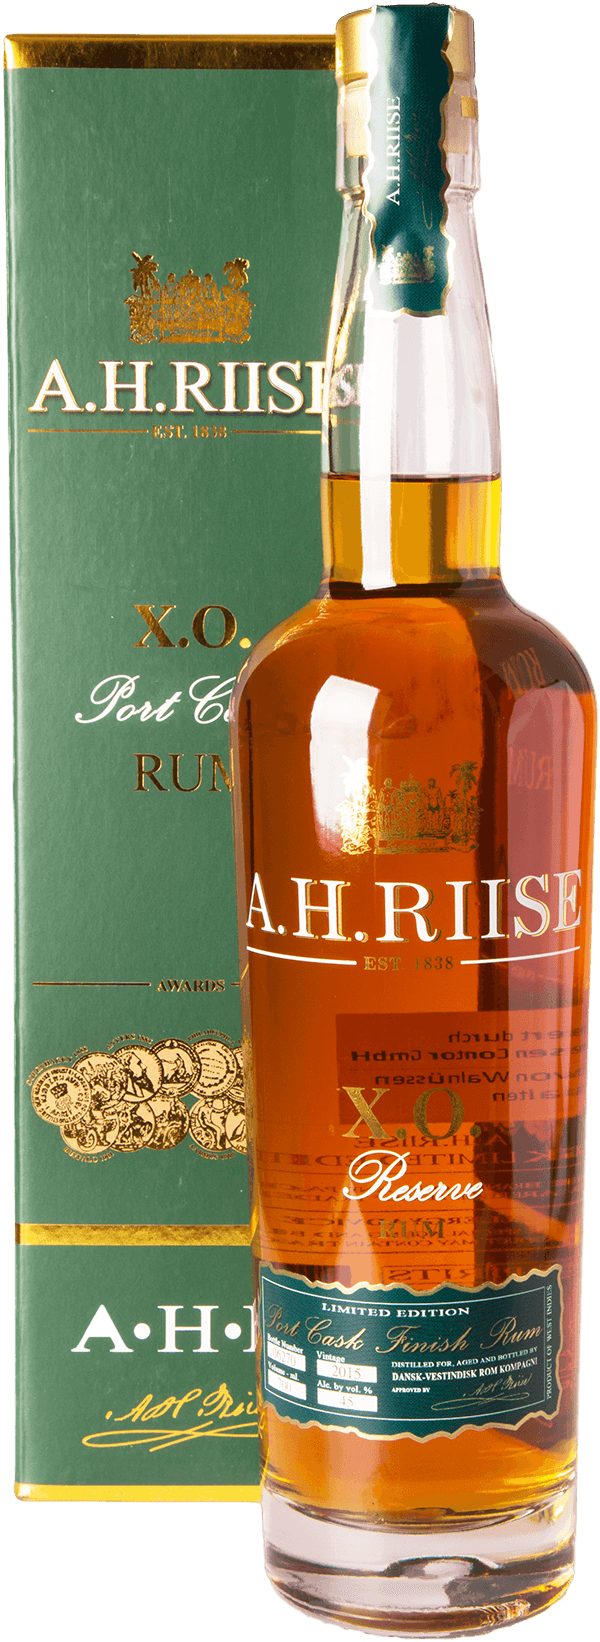 A.H. Riise XO Reserve Port Cask Finish Rum 45%